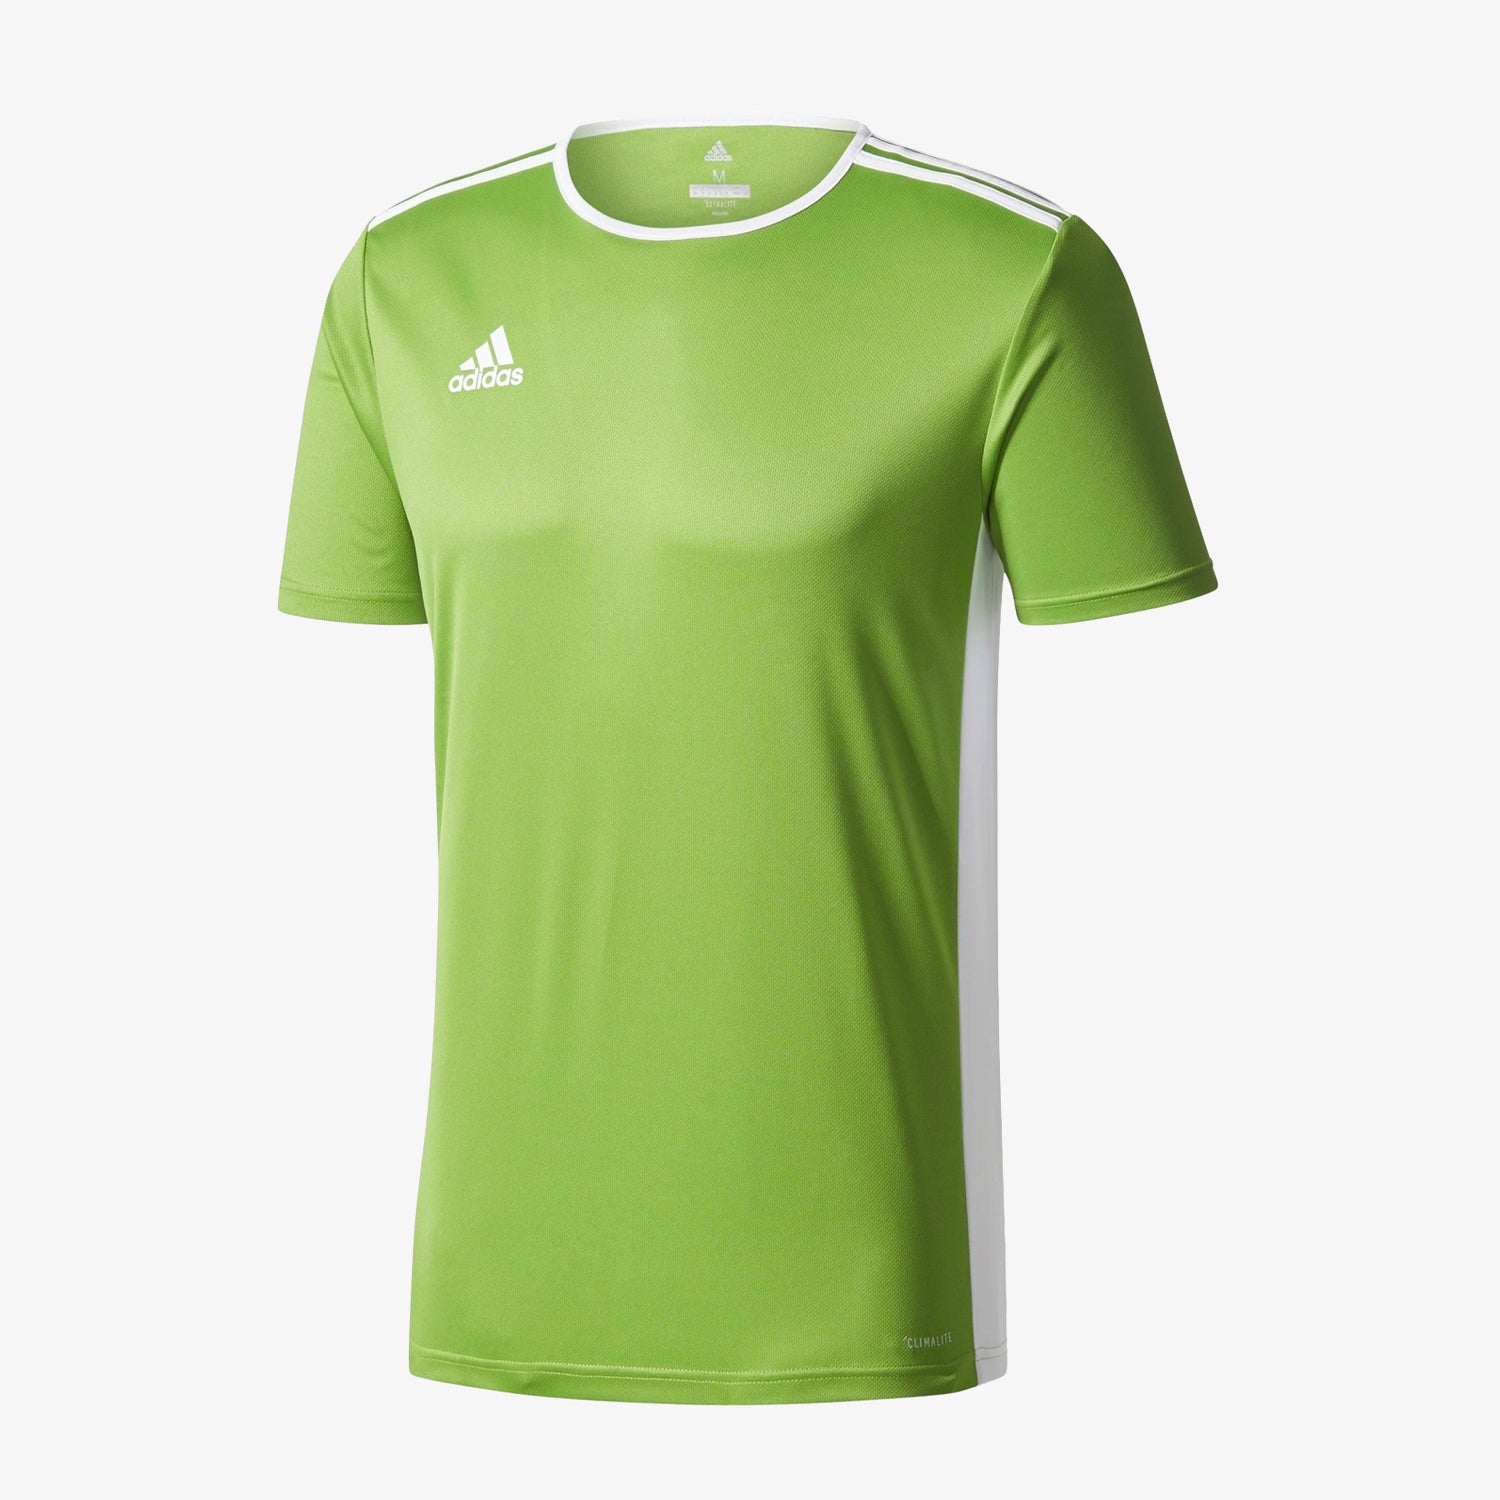  adidas Boys' Entrada 18 Jersey, Rave Green/White, XX-Small :  Clothing, Shoes & Jewelry